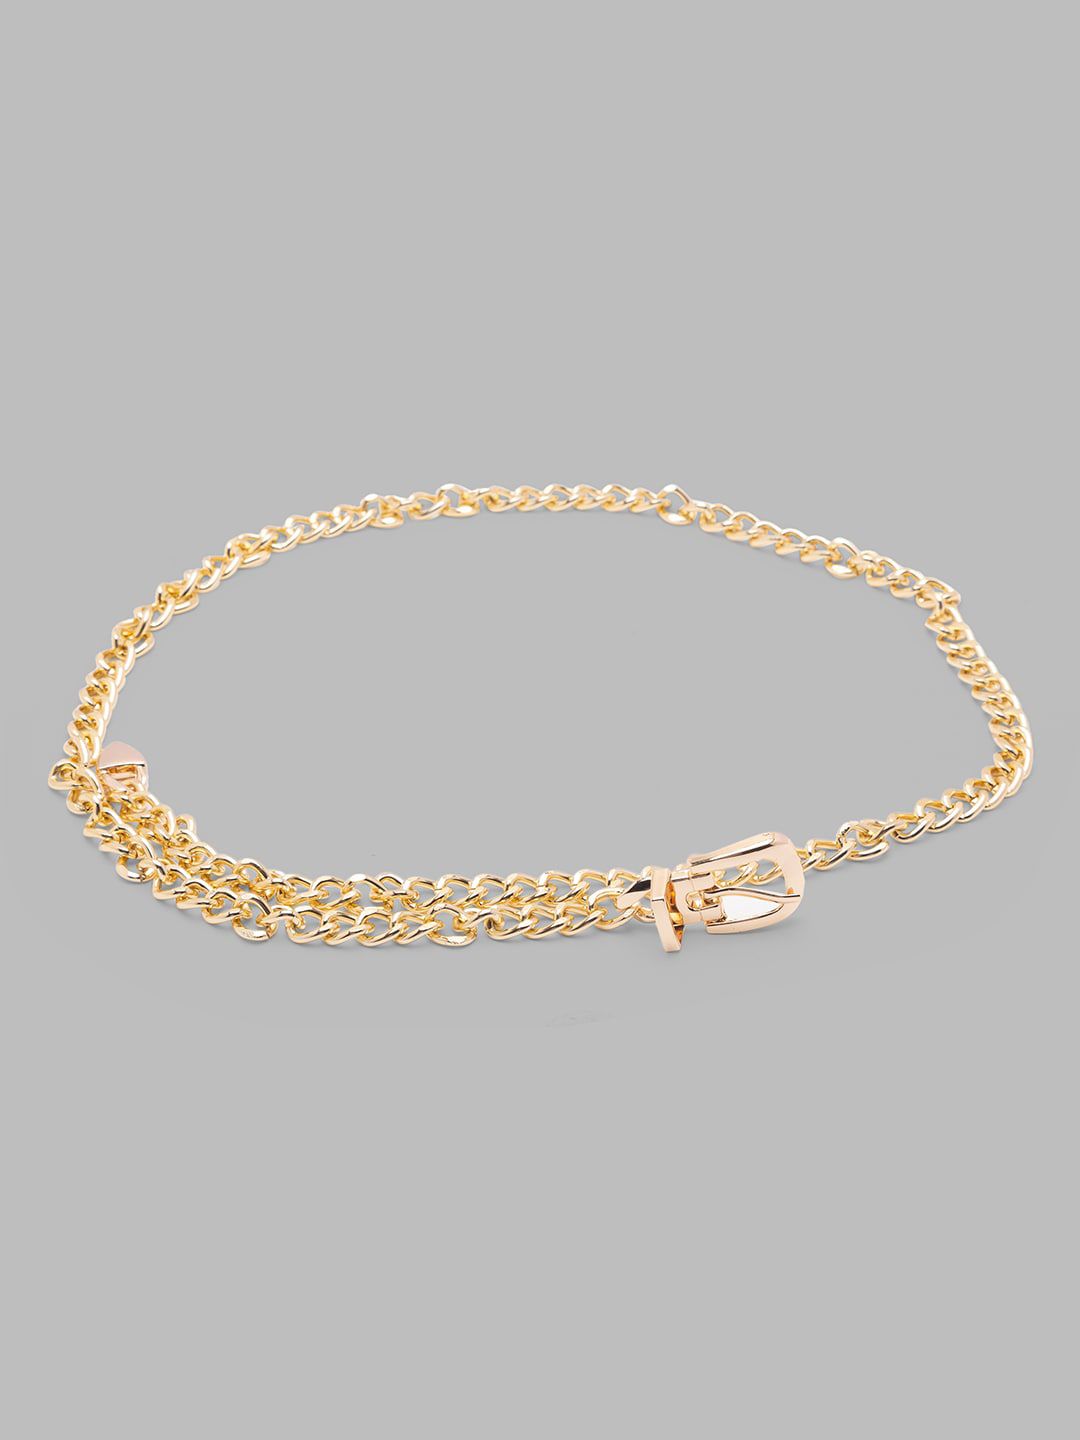 Globus Women Gold-Toned Chain Link Belt Price in India